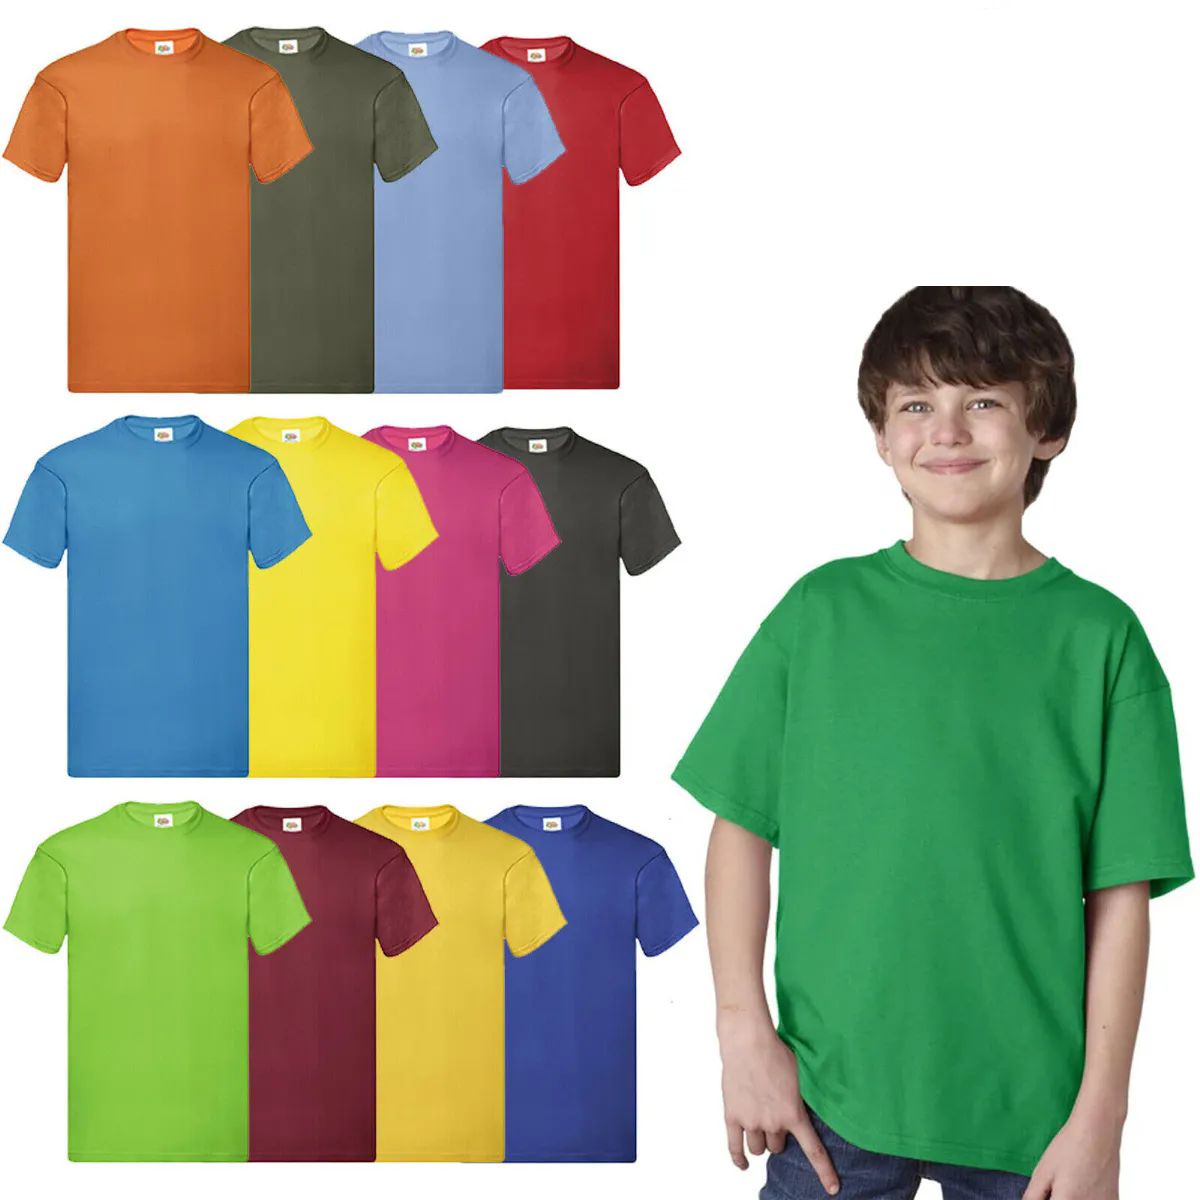 432 Pieces of Billion Hats Kids Youth Cotton Assorted Colors T Shirts Size M